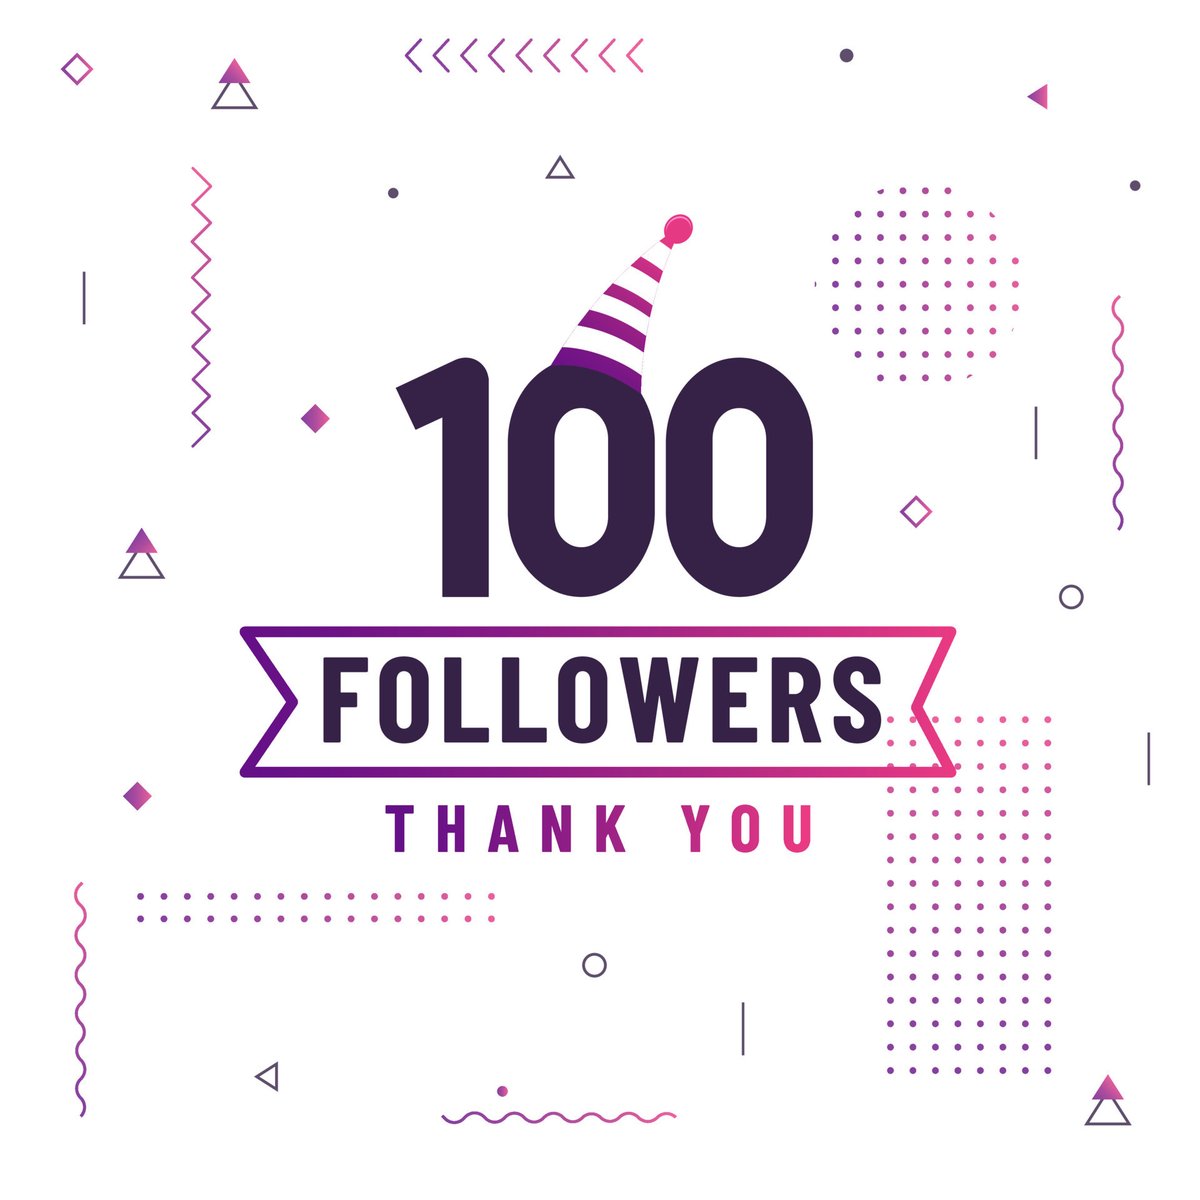 🎉 Thank you to all my amazing followers for helping me reach 100 followers! 
Your support means everything to me. We will have many more milestones together! 🚀 
#Grateful #100Followers #Growth #milestone